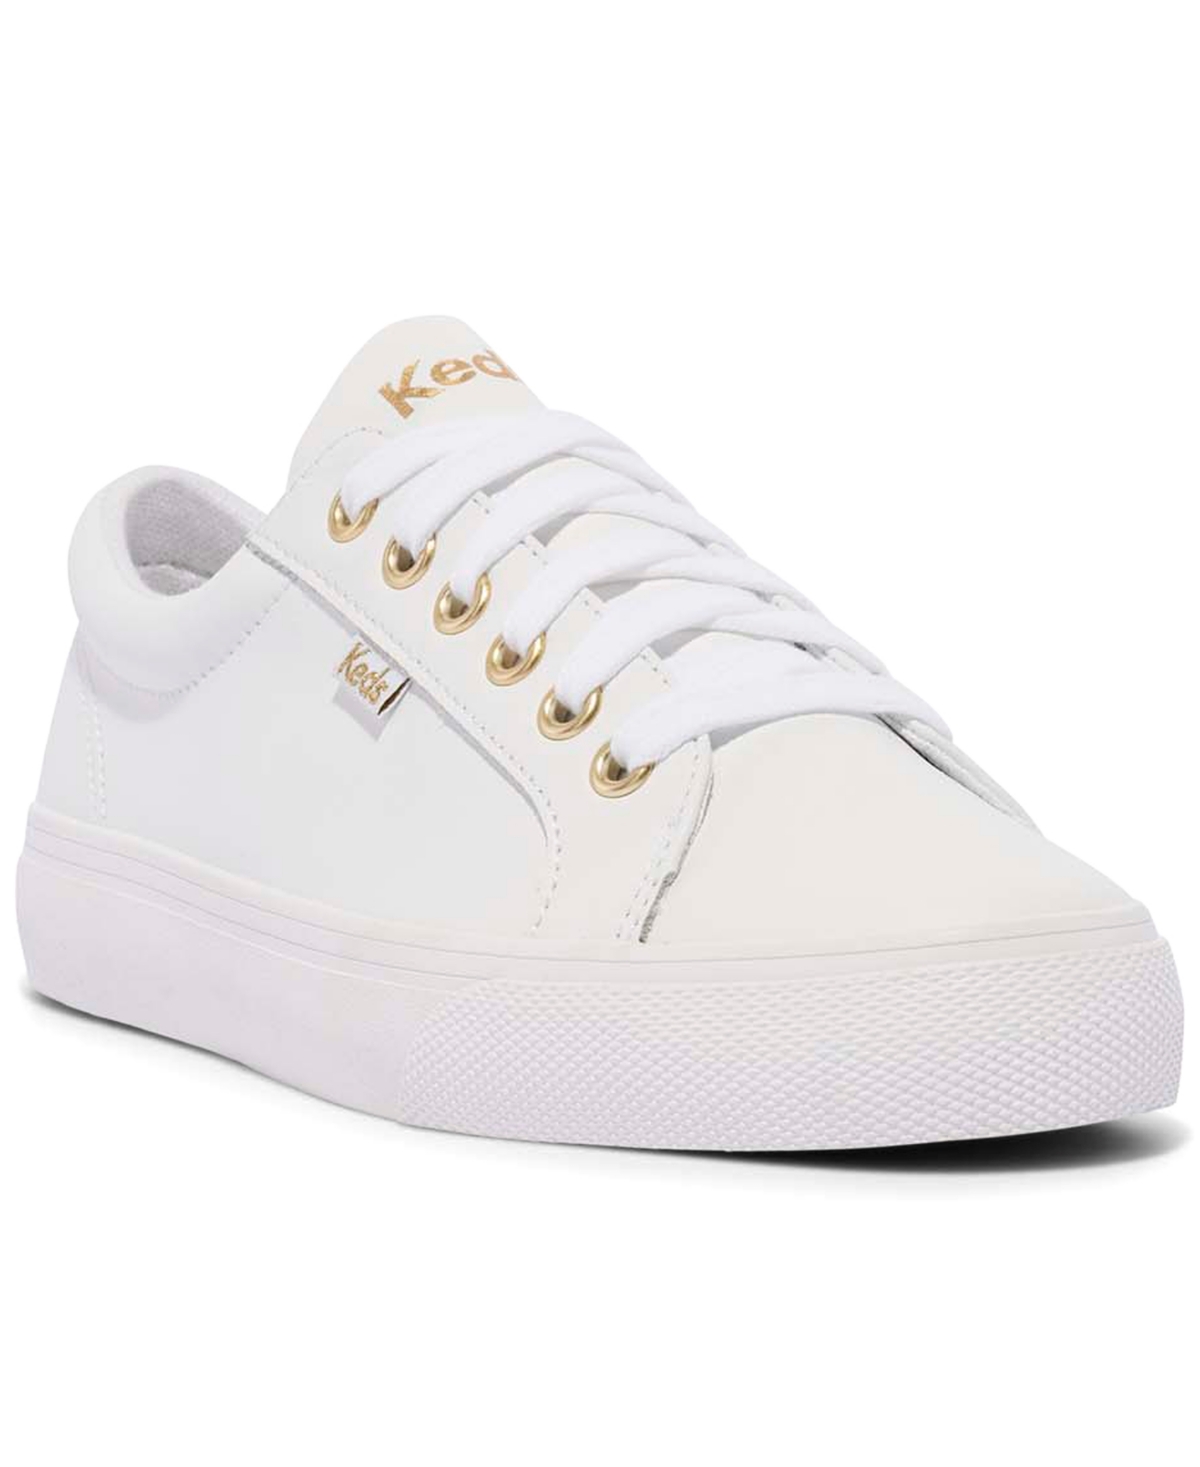 Women's Jump Kick Leather Casual Sneakers from Finish Line - White, Gold